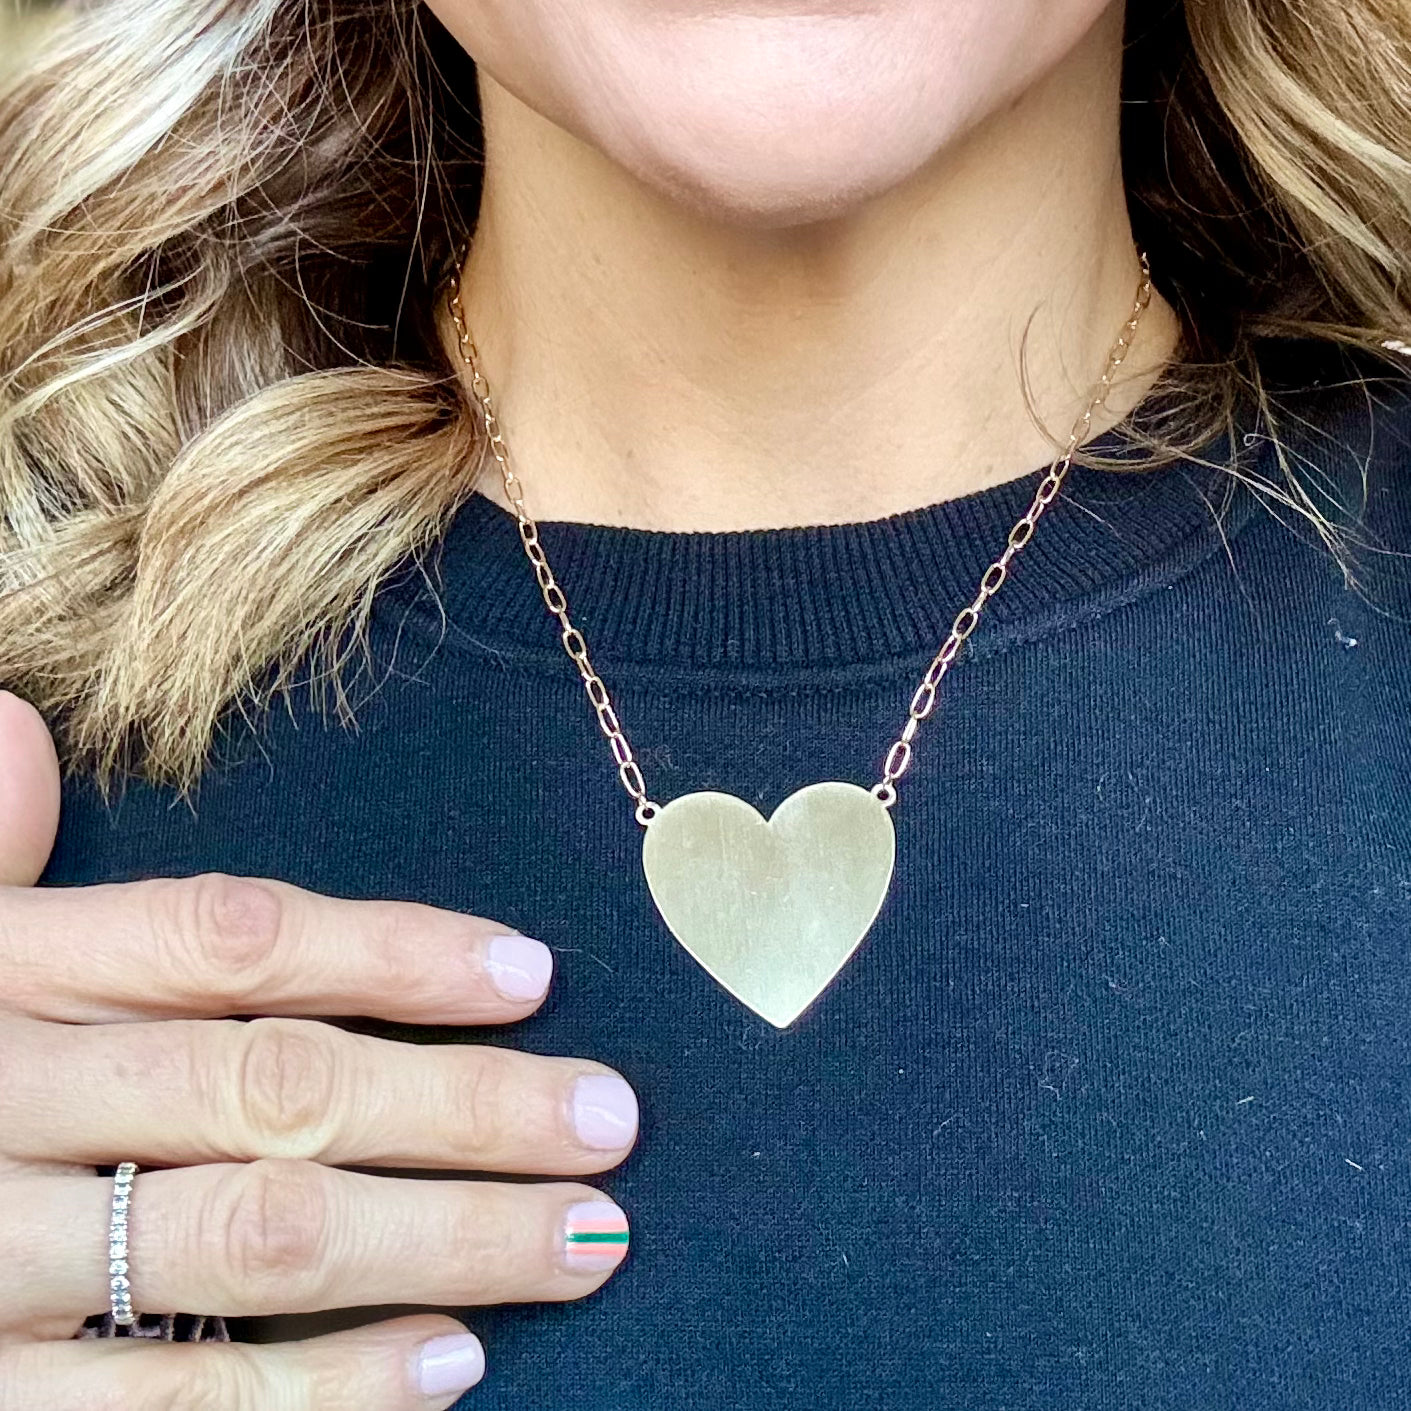 Oversized gold heart pendant necklace on linked chain